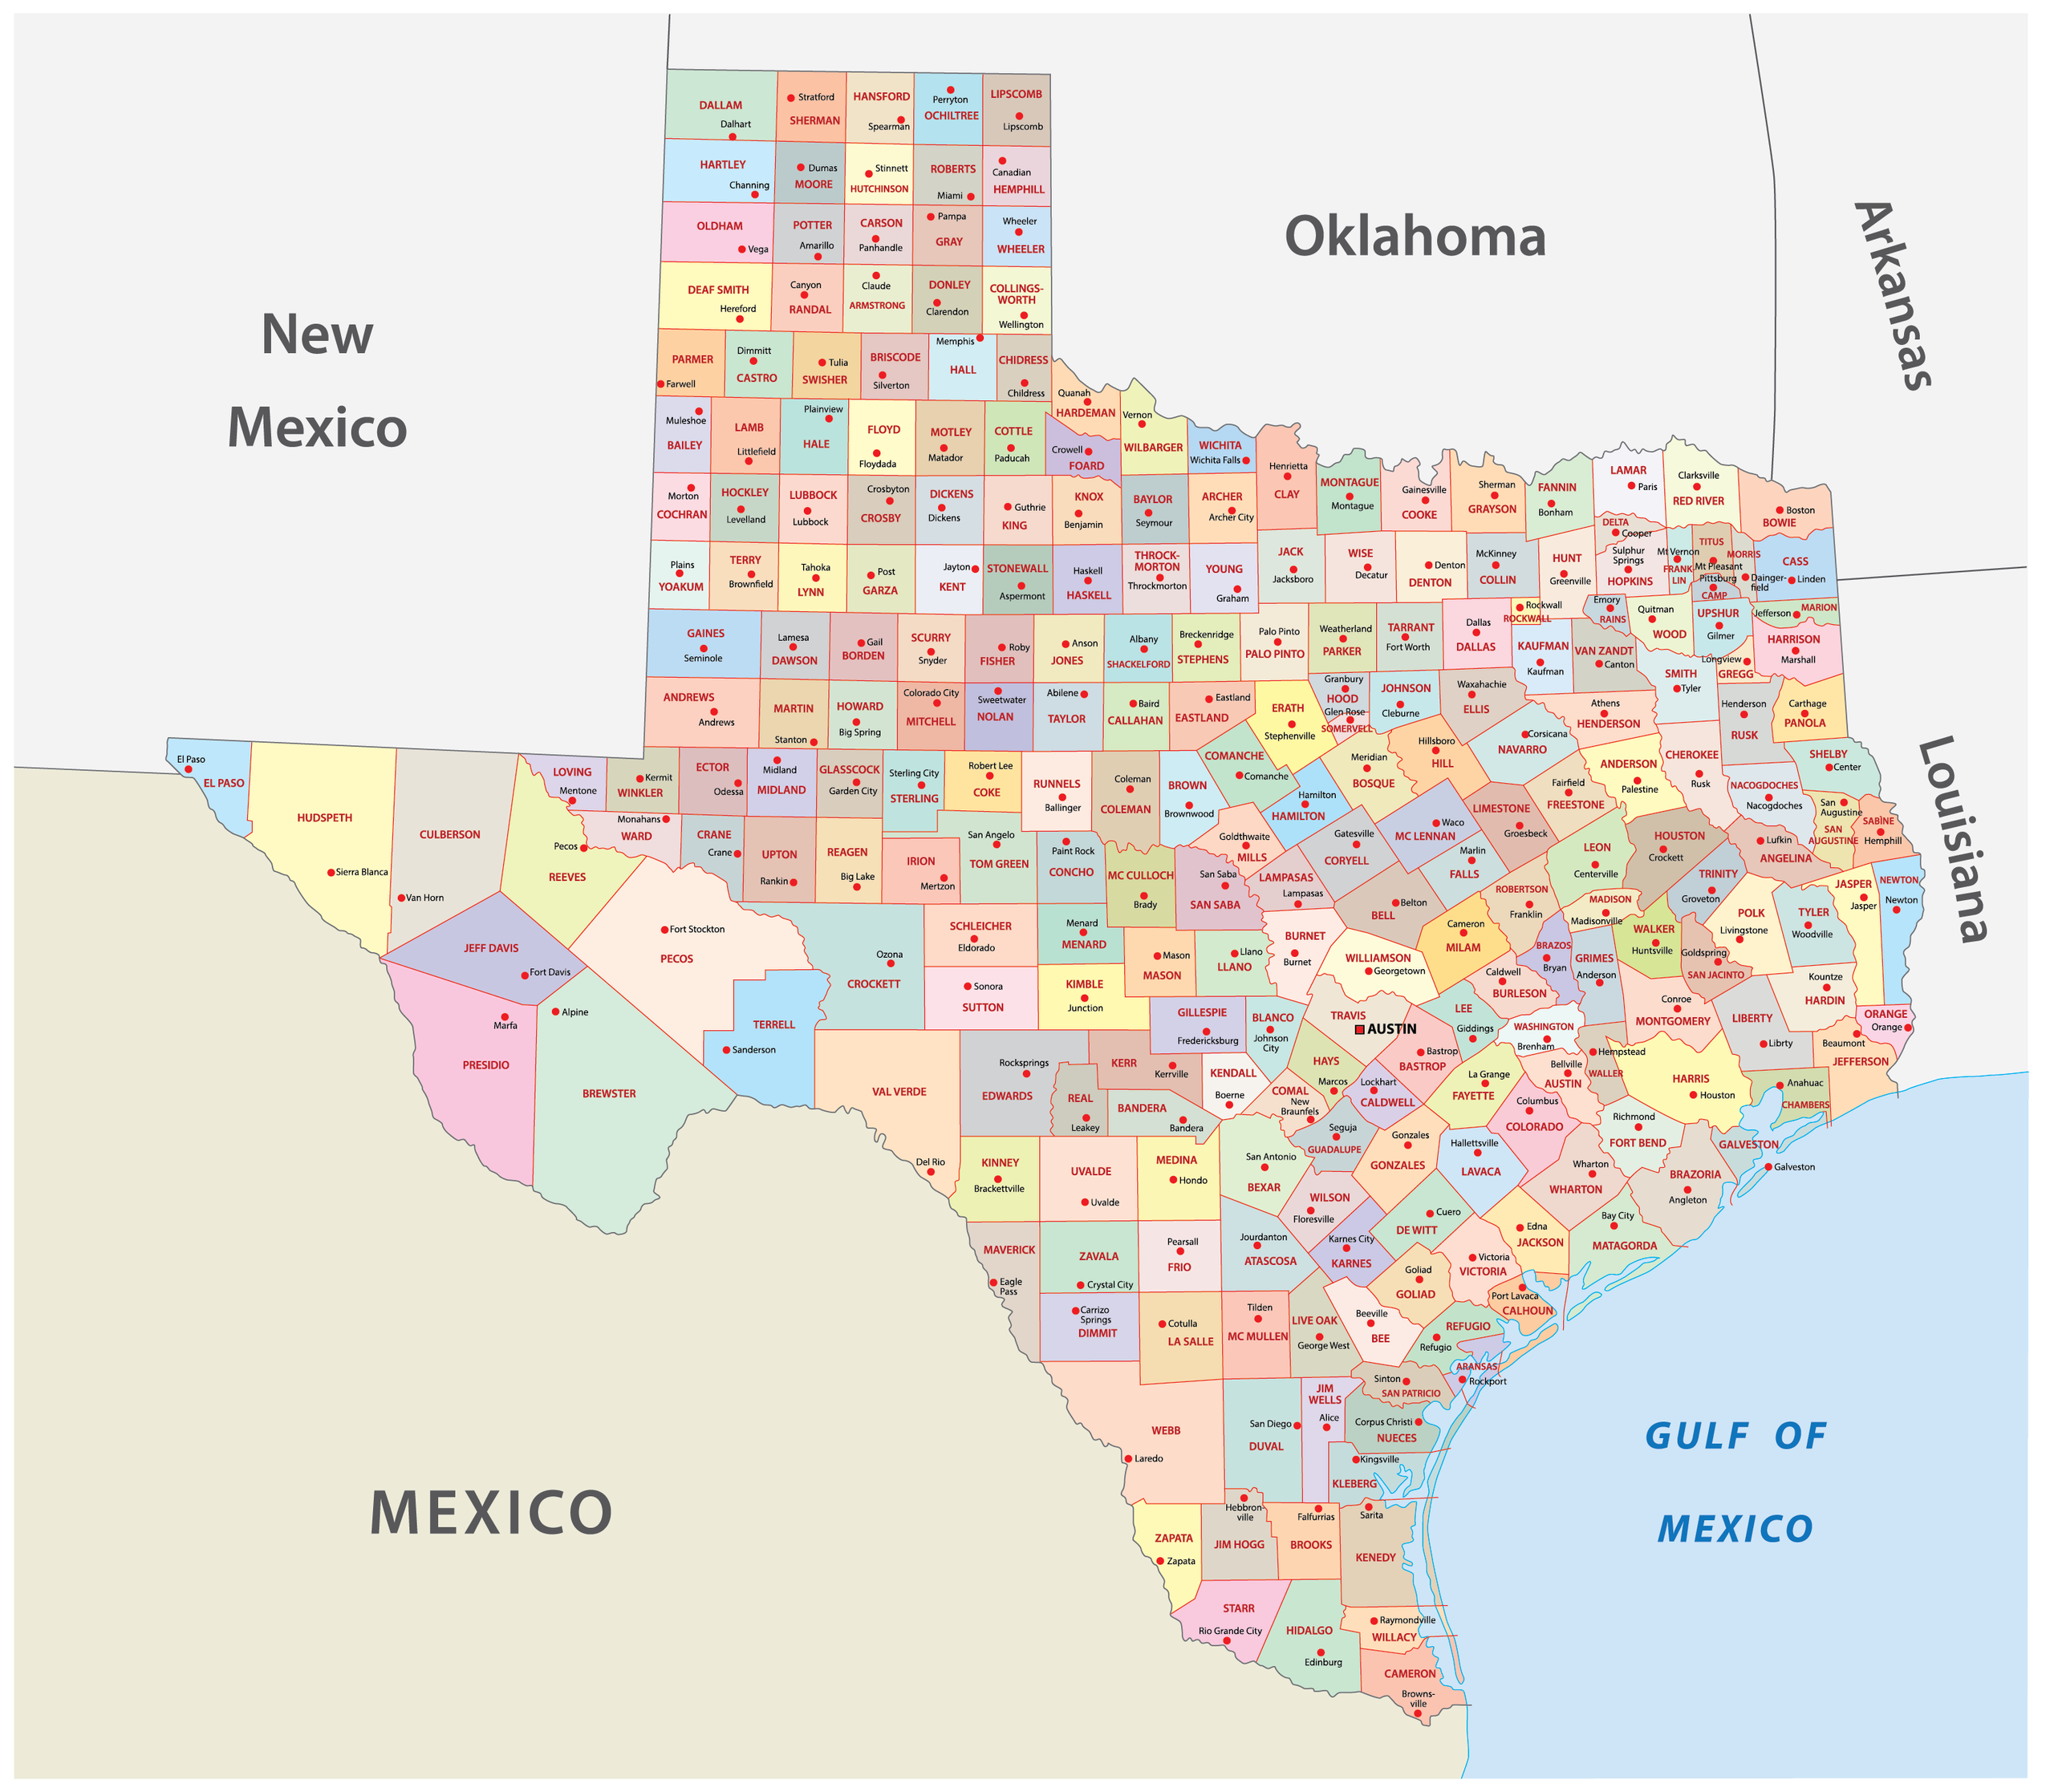 The State of Texas is divided into 254 counties. 